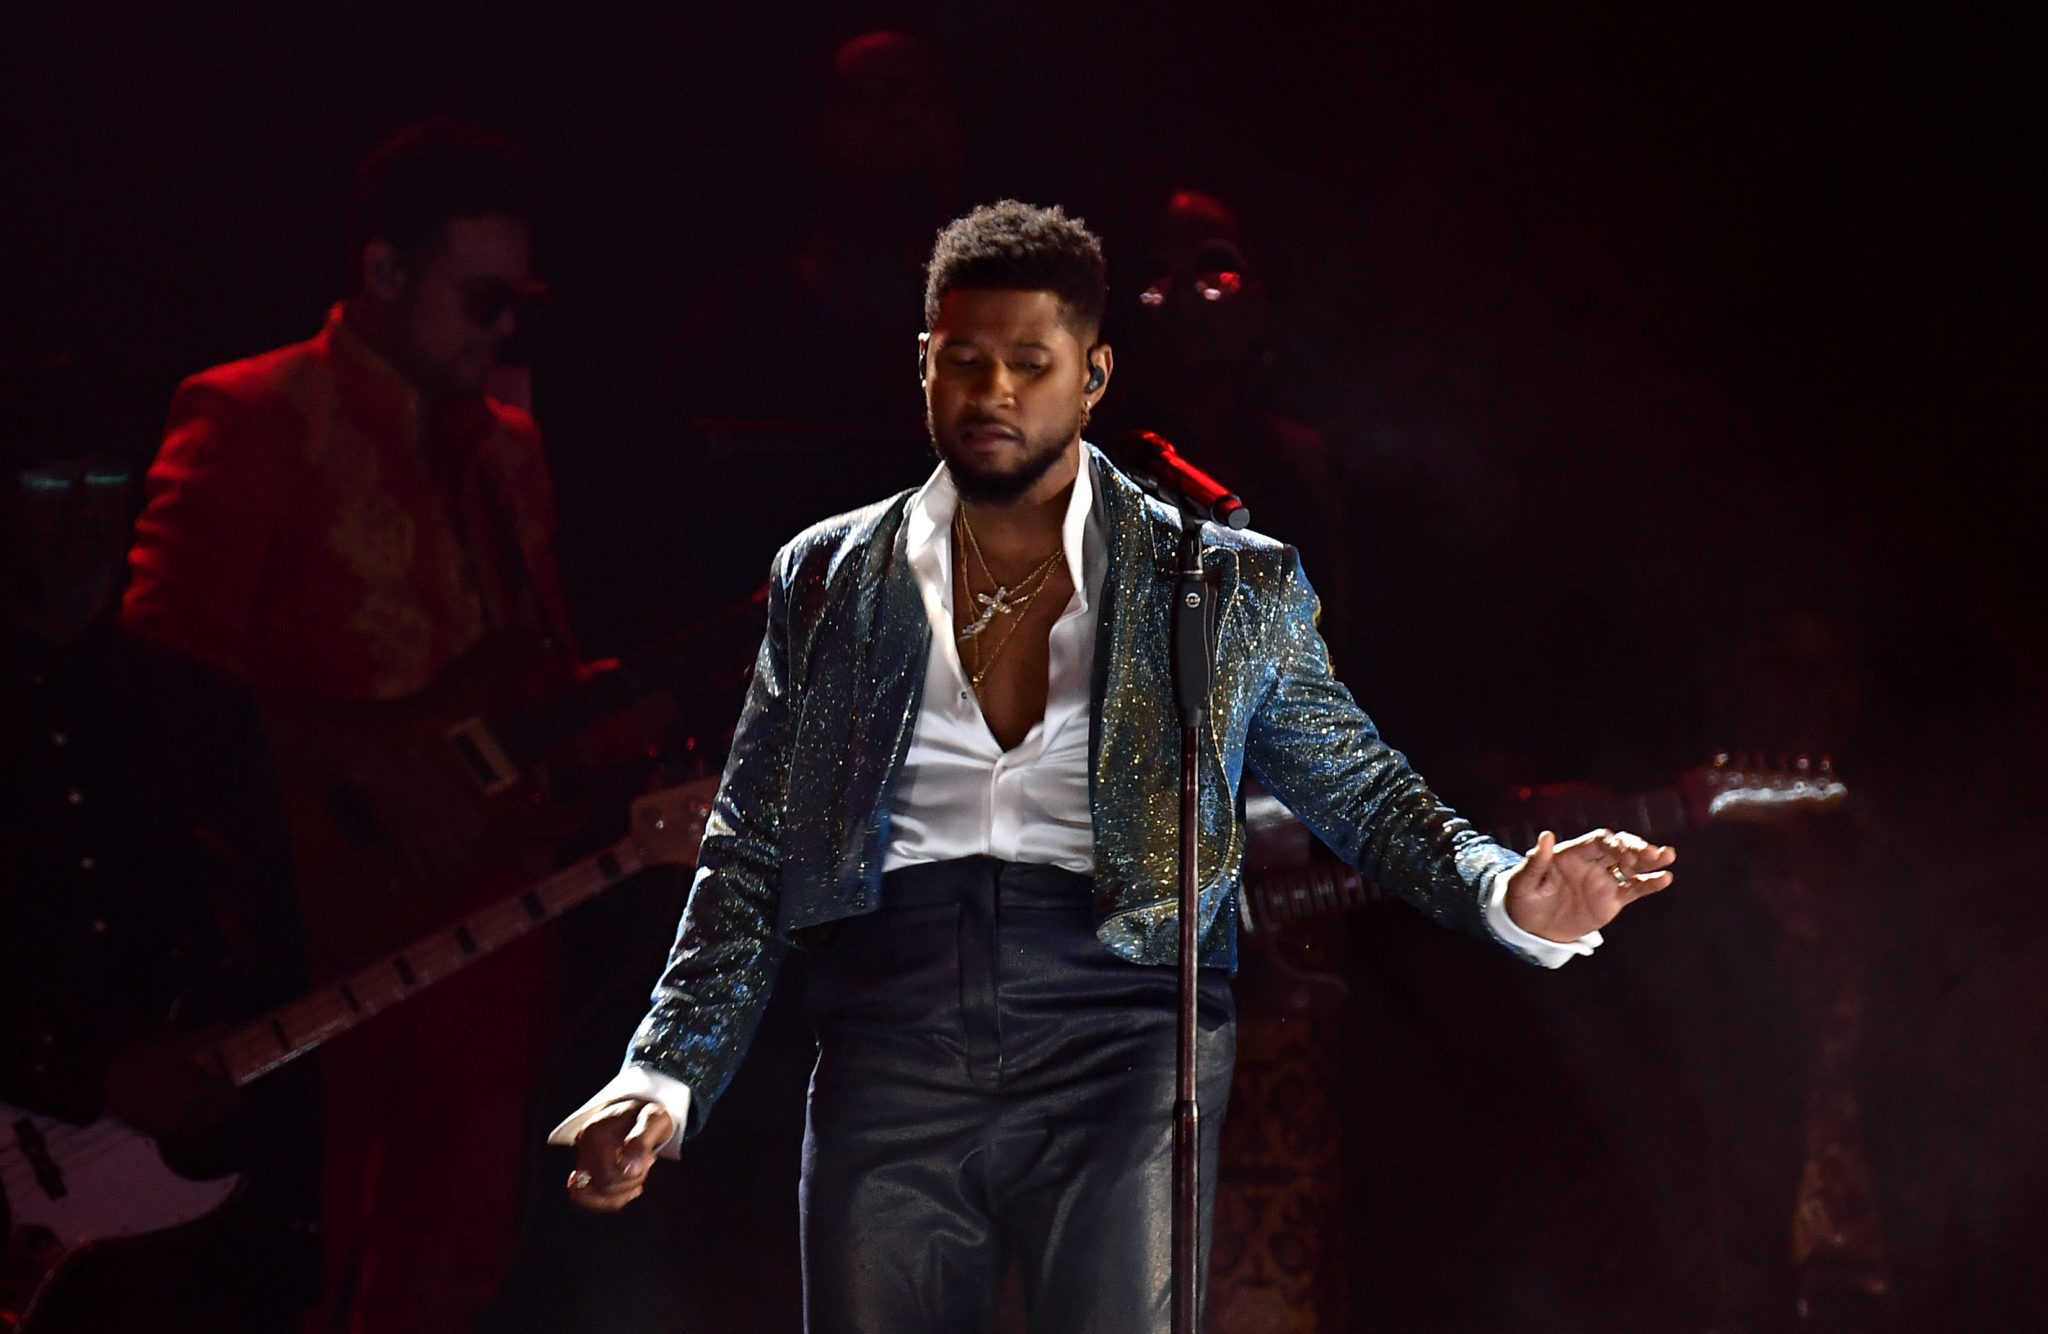 usher residency tickets prices